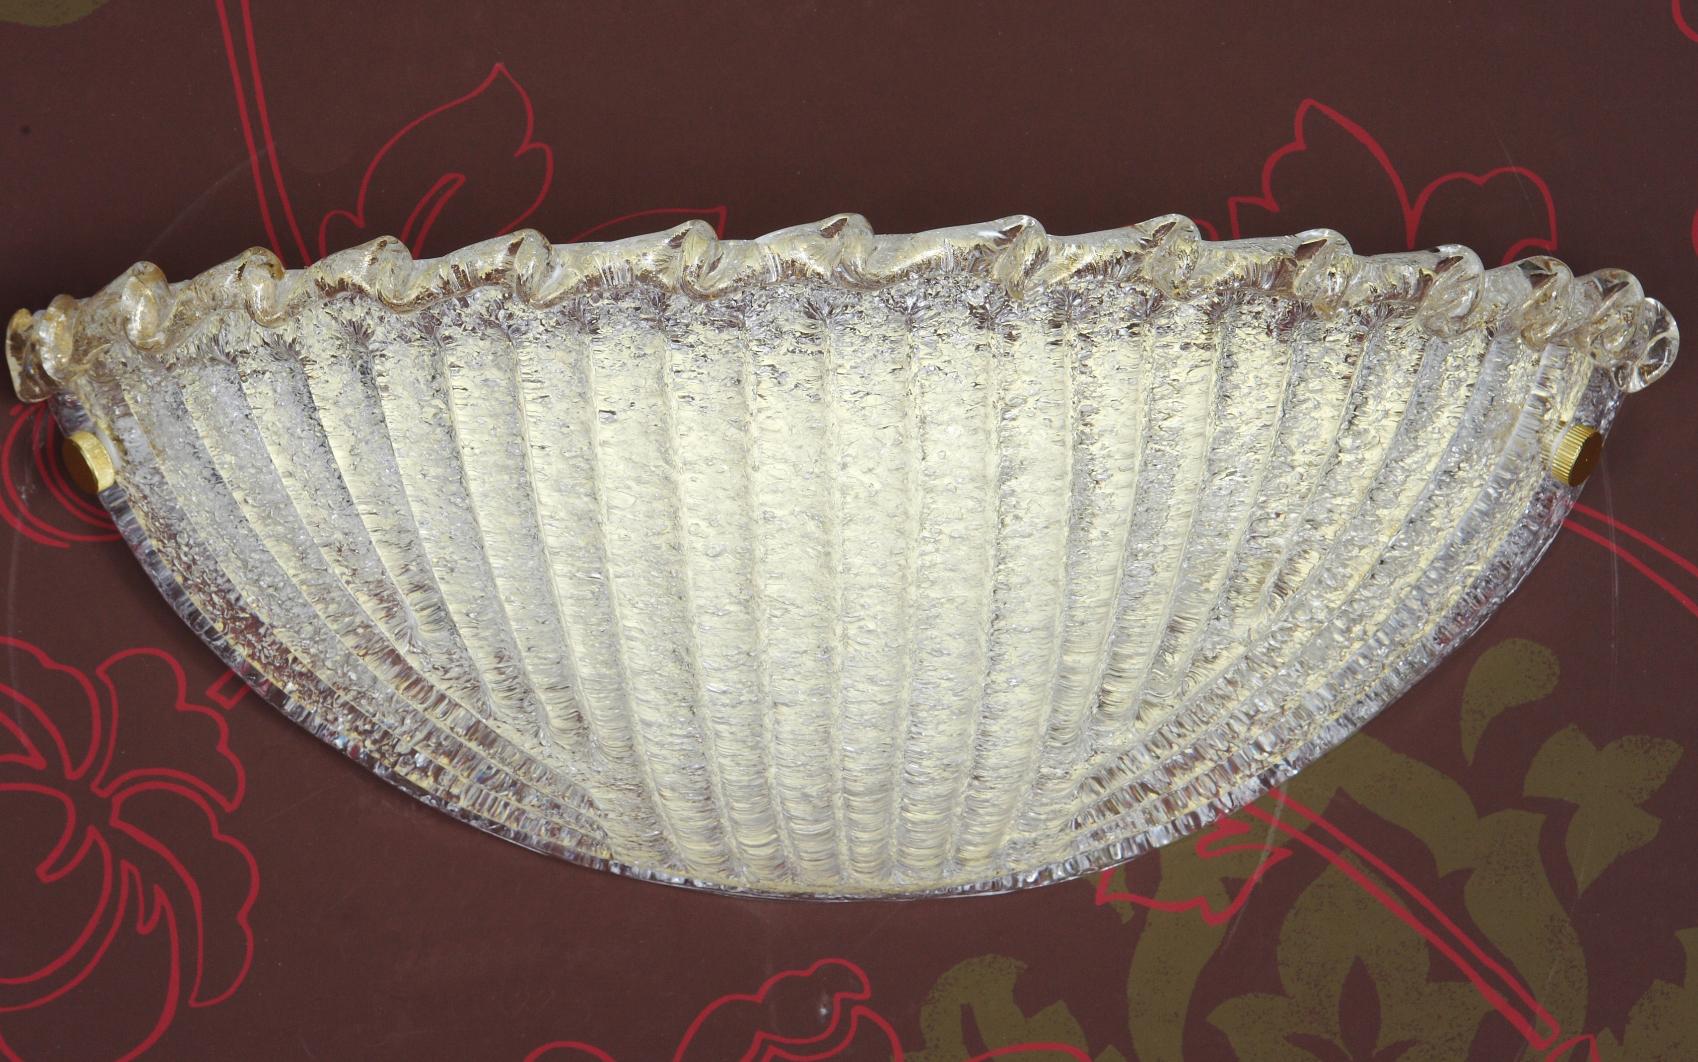 Italian wall light with a Murano glass shield hand blown in Graniglia technique to produce granular textured effect with gold flecks, mounted on gold plated finish frame / Made in Italy
Measures: Height 7 inches, width 16 inches, depth 6 inches
1